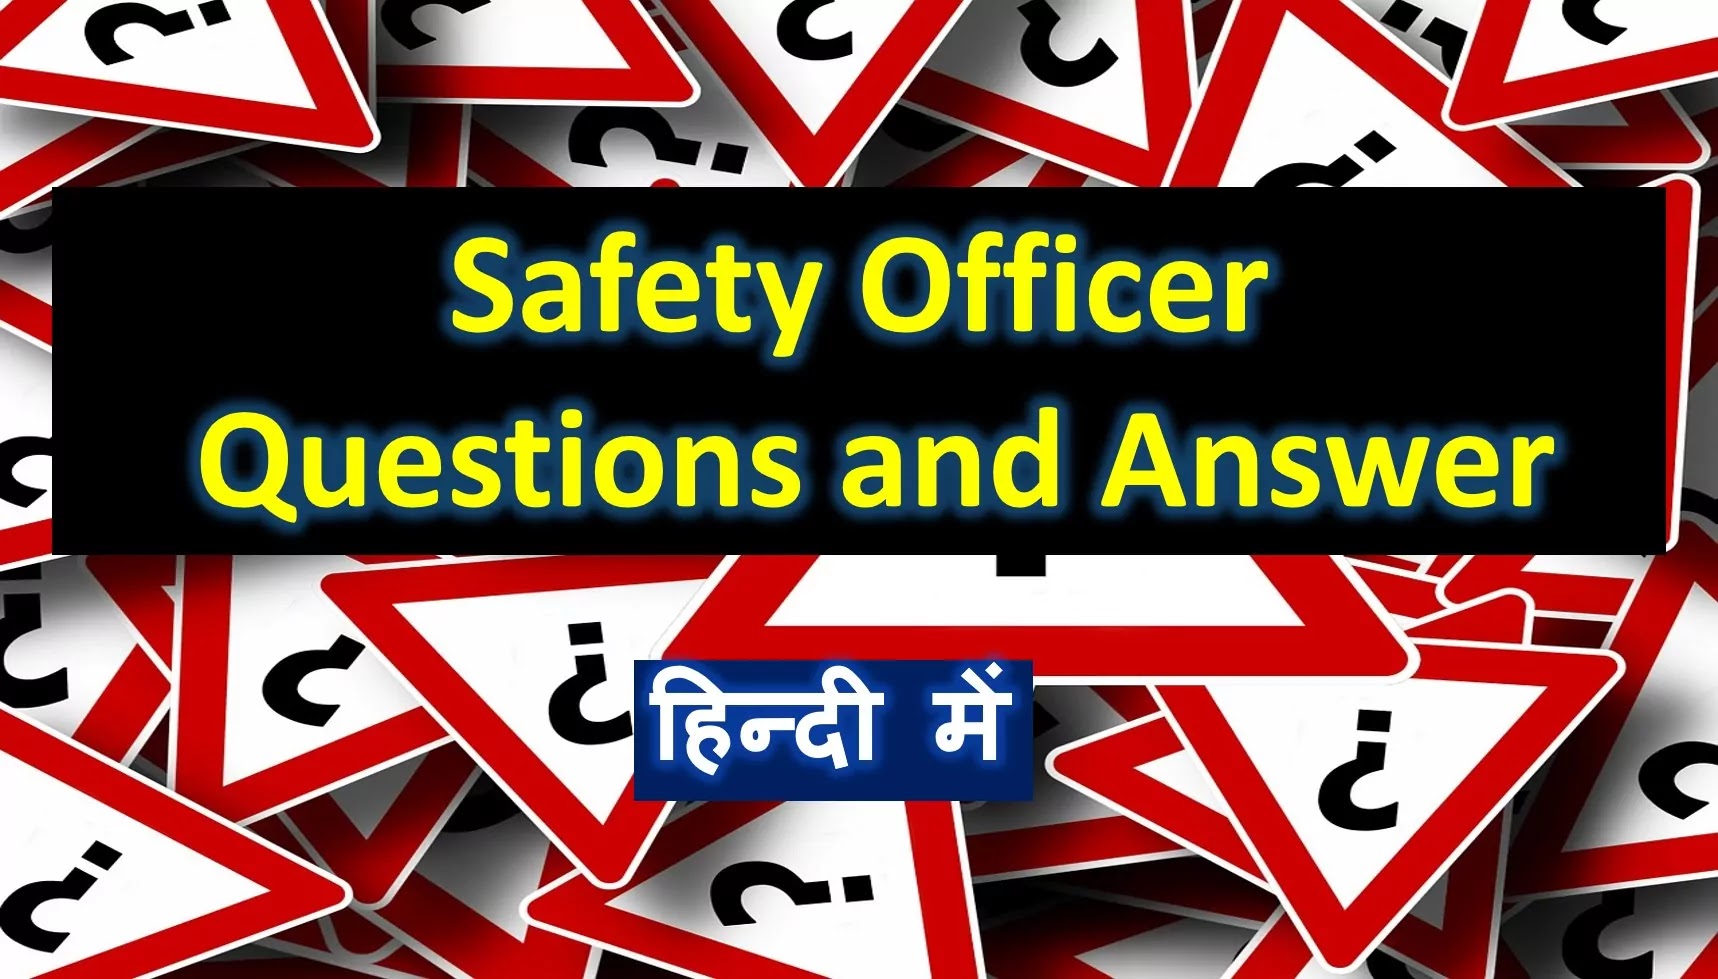 50 Safety Officer Job Interview Questions & Answer